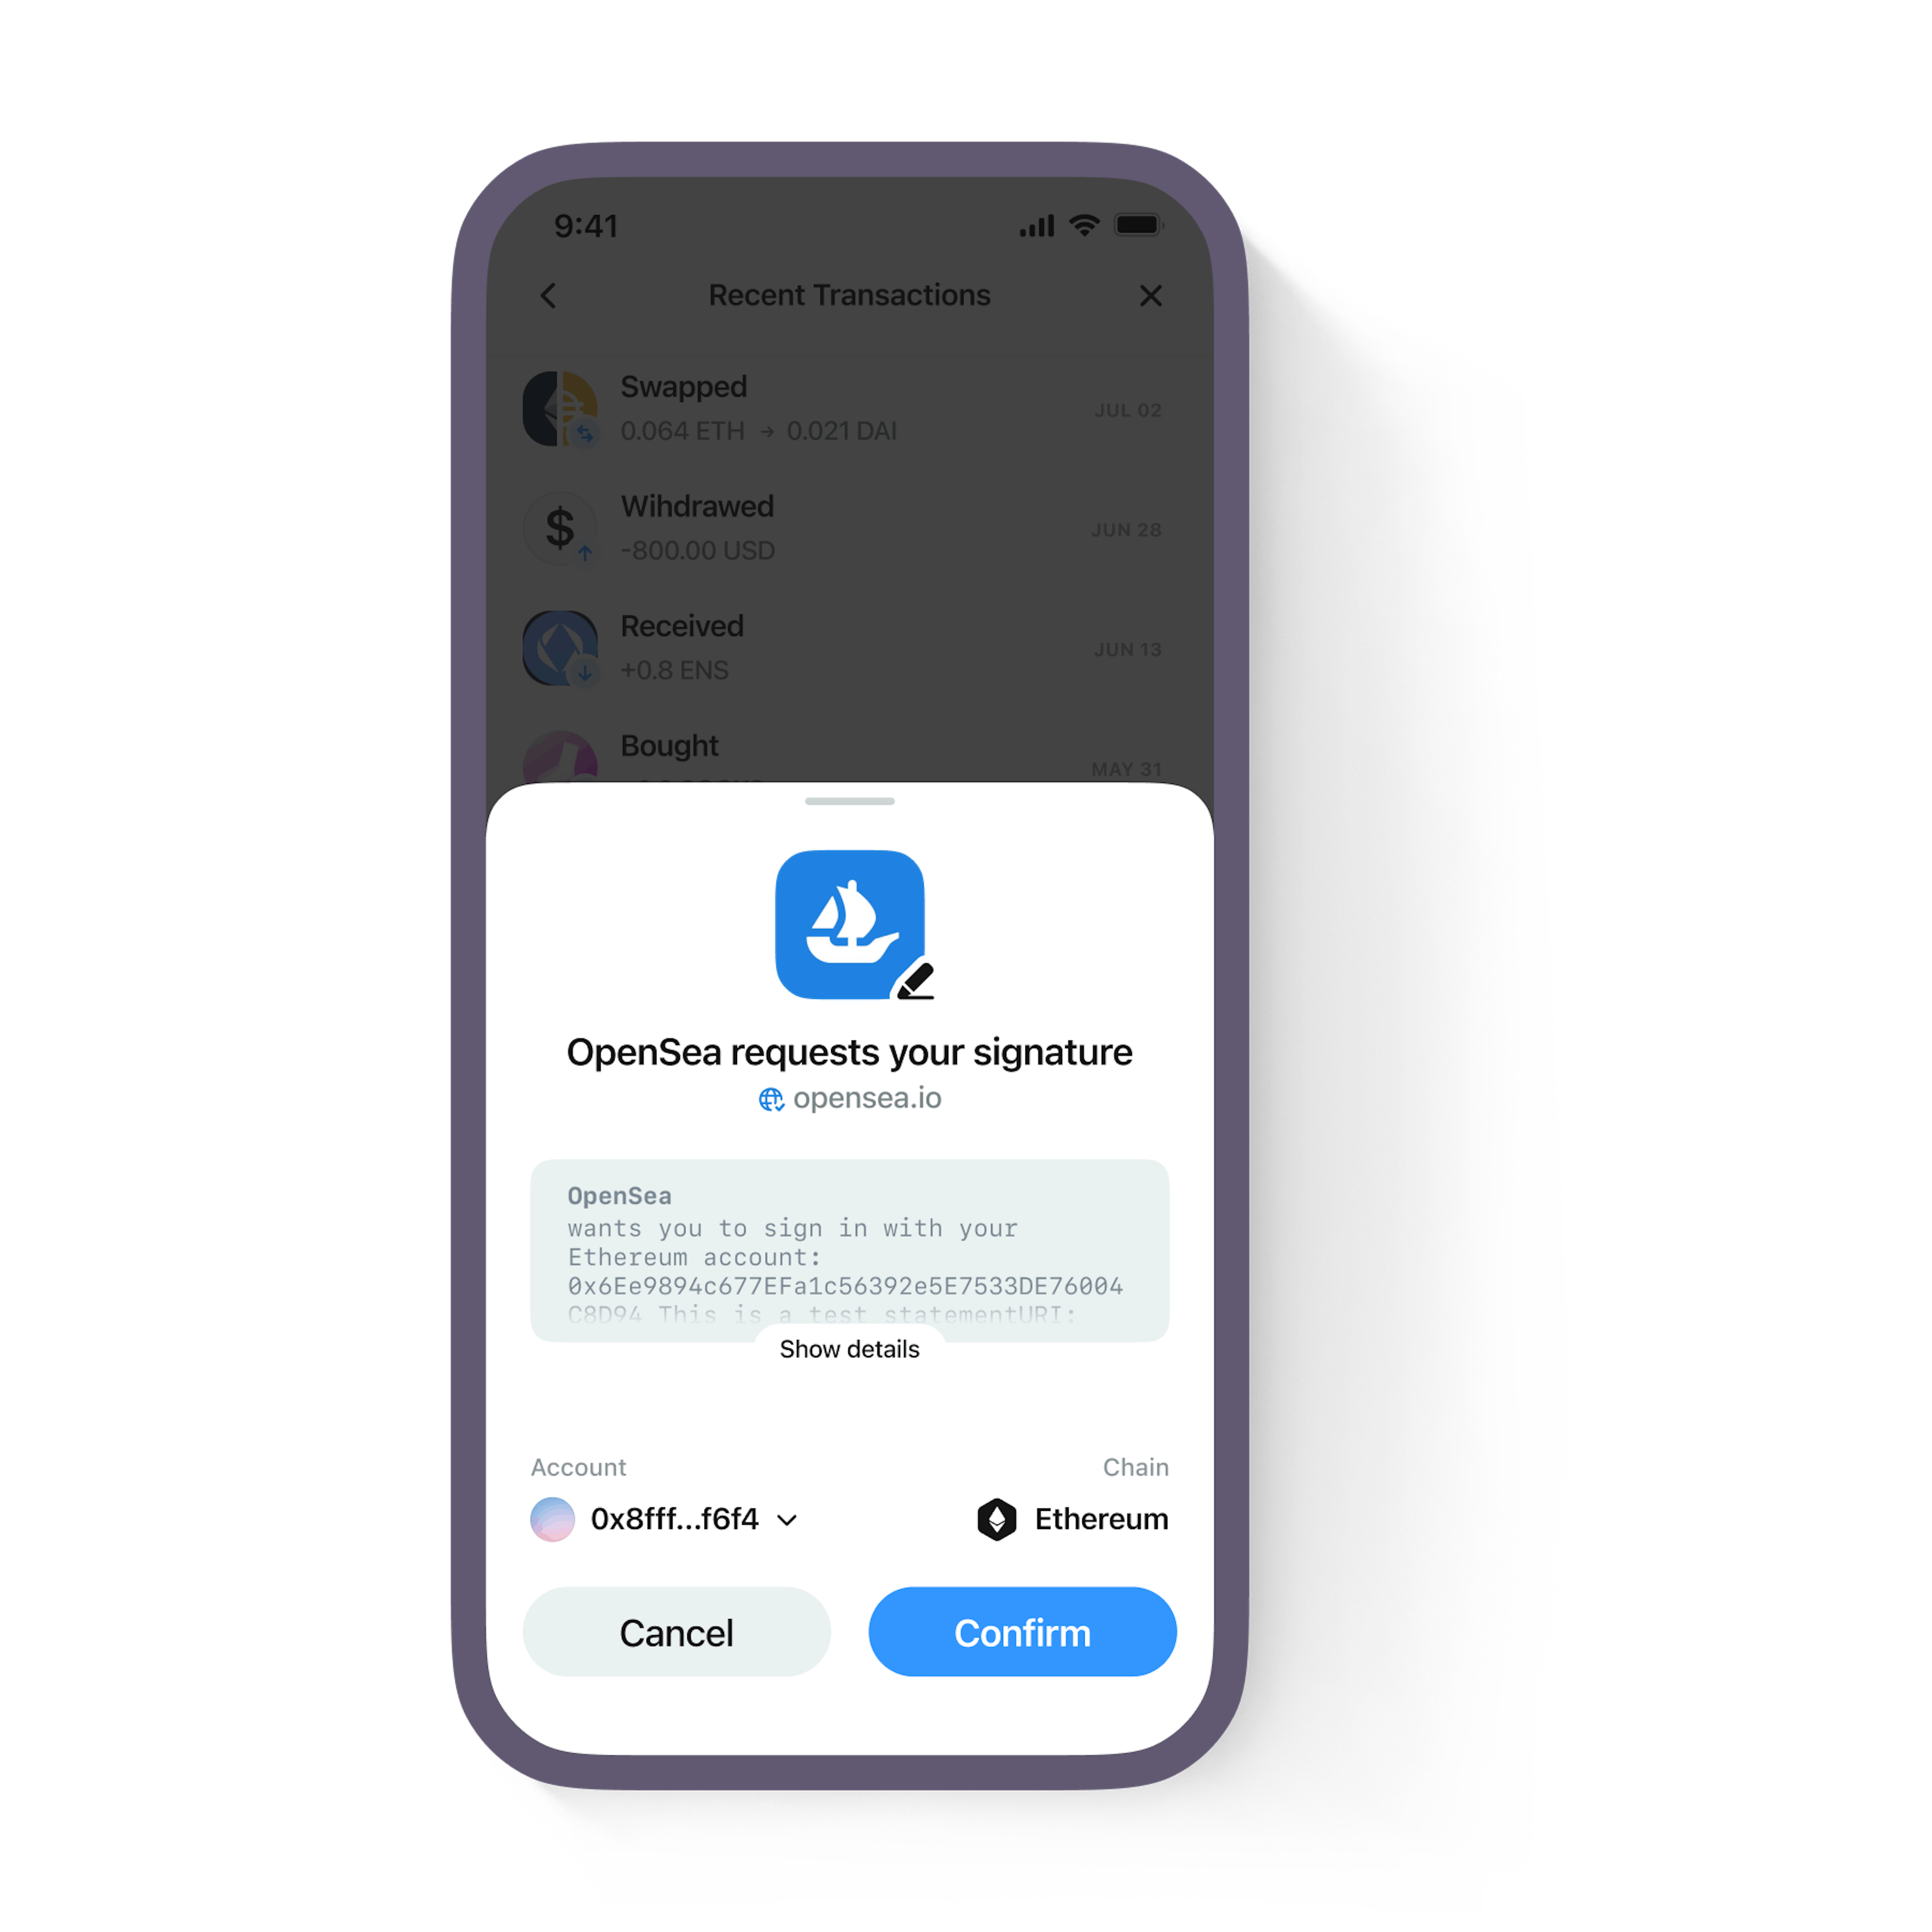 Signing a message to approve an app connection using Web3Wallet